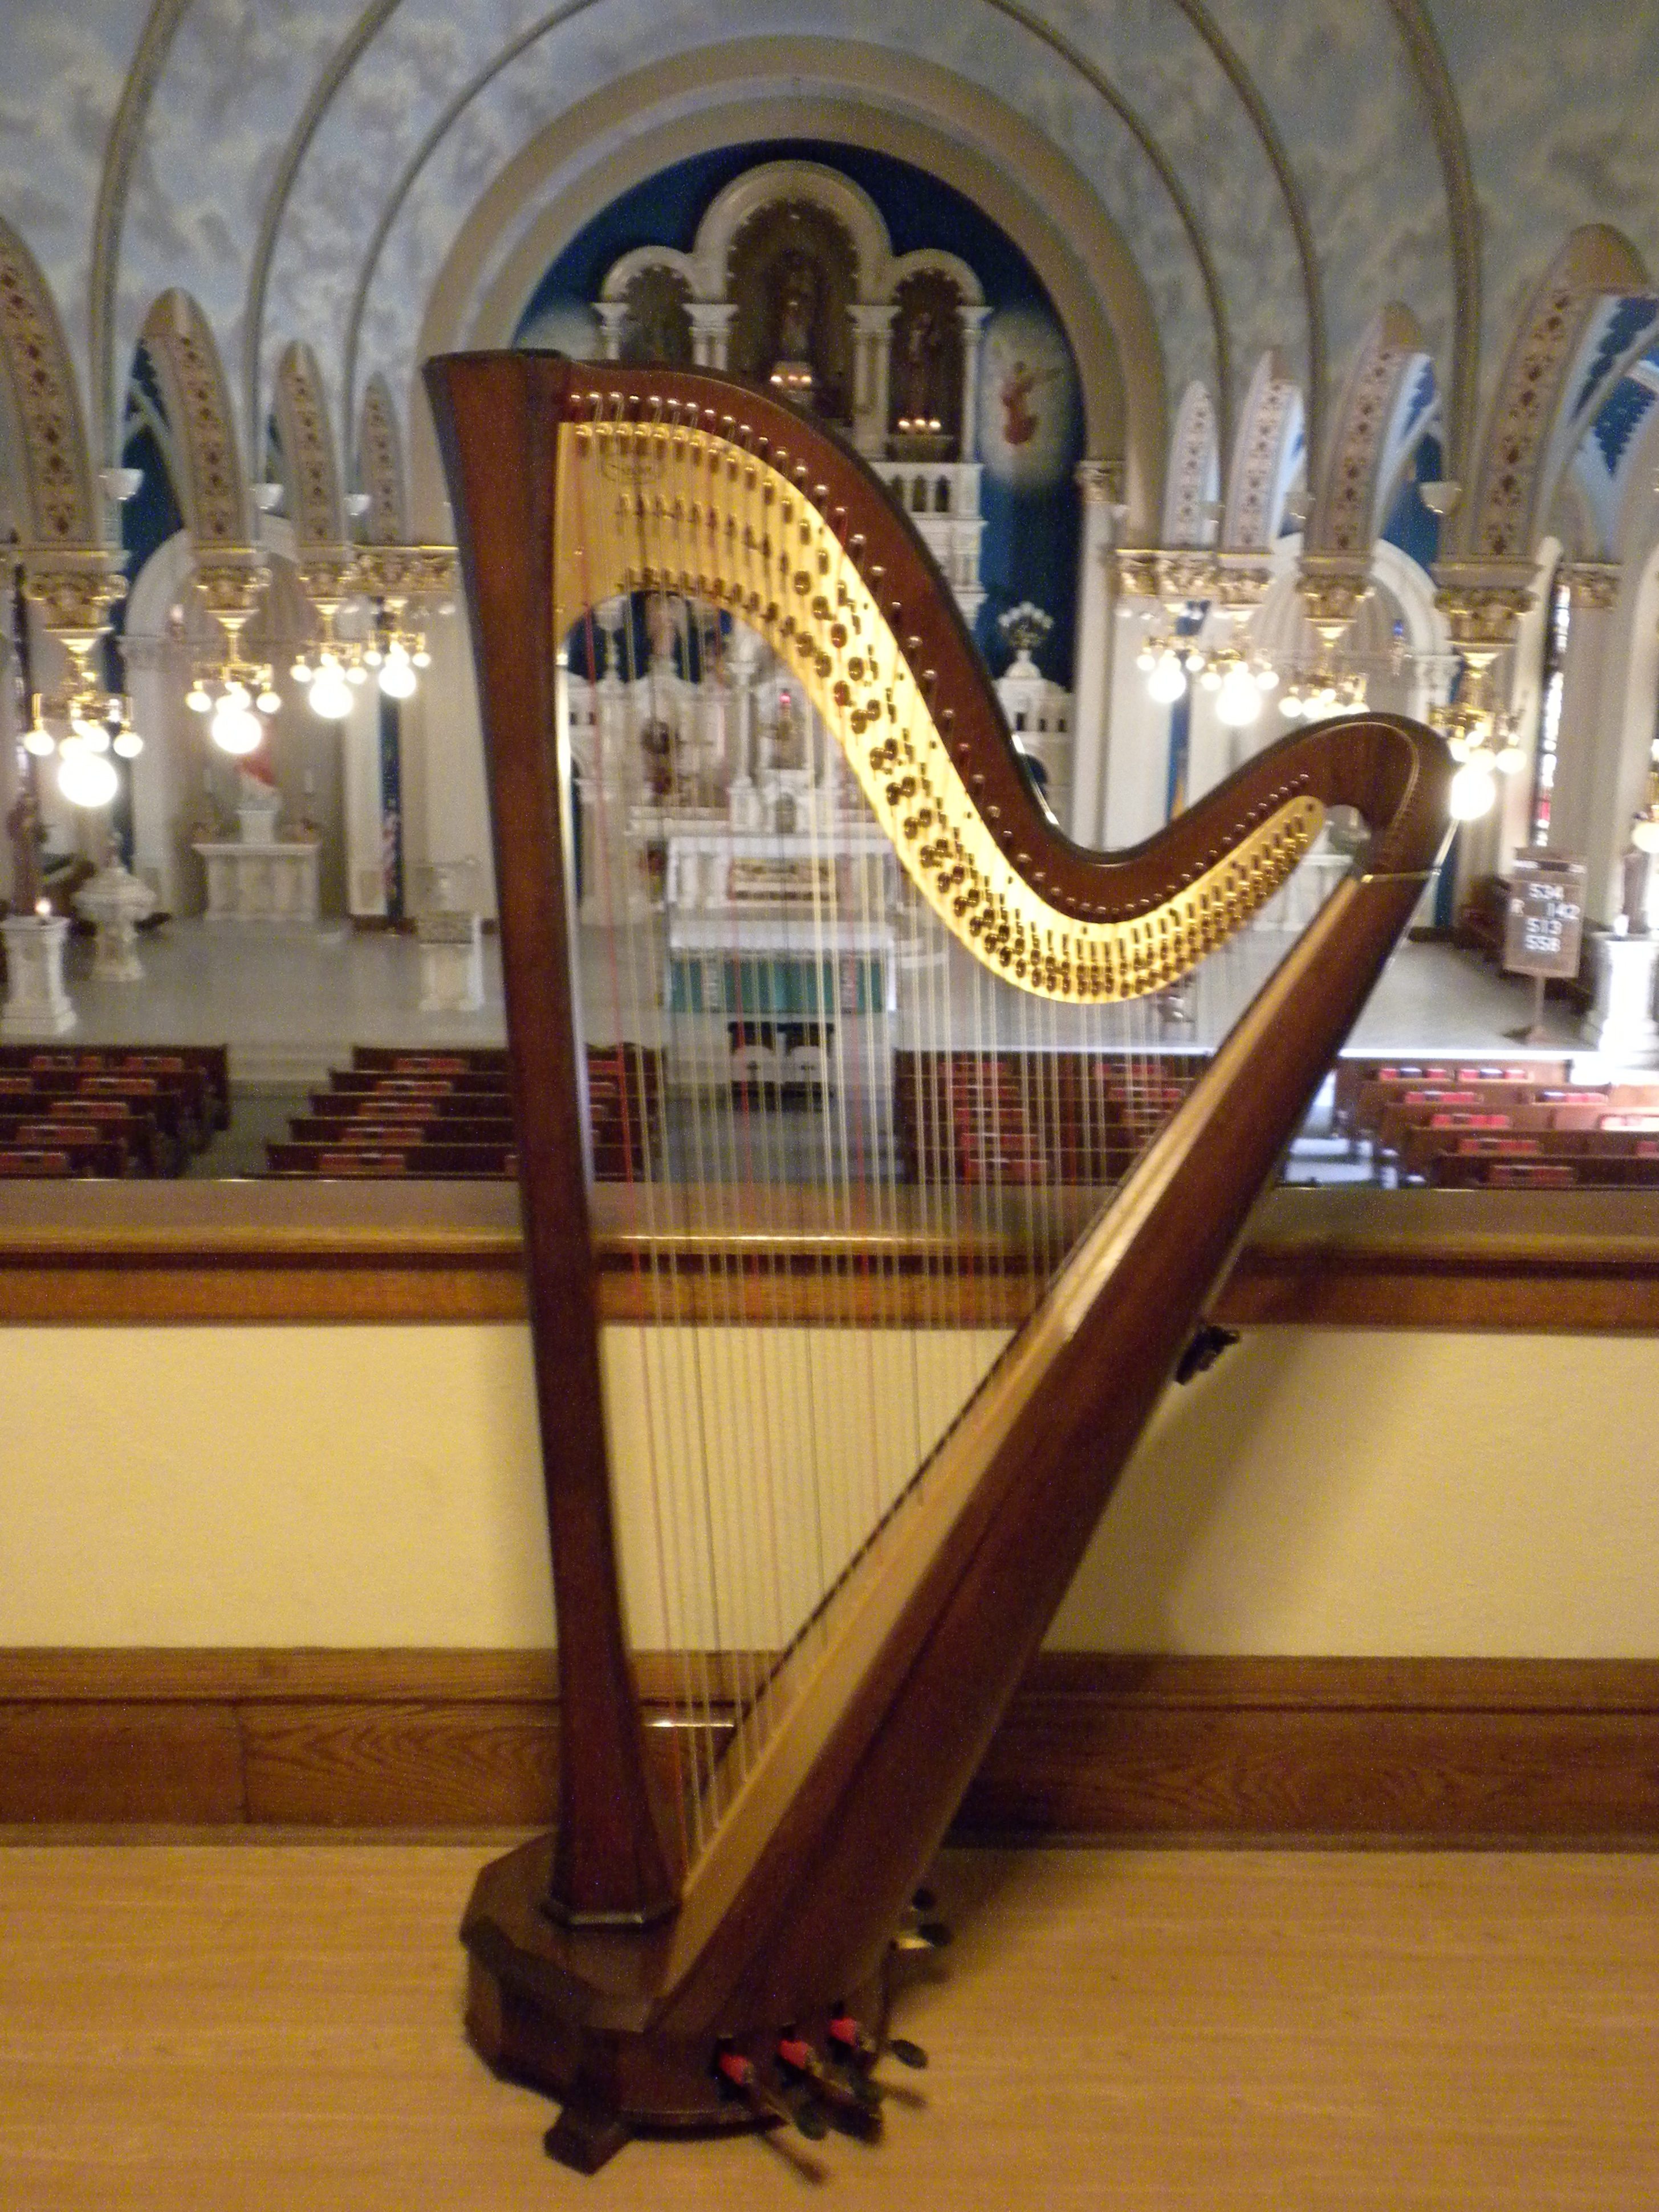 Picture of Harp in a Church